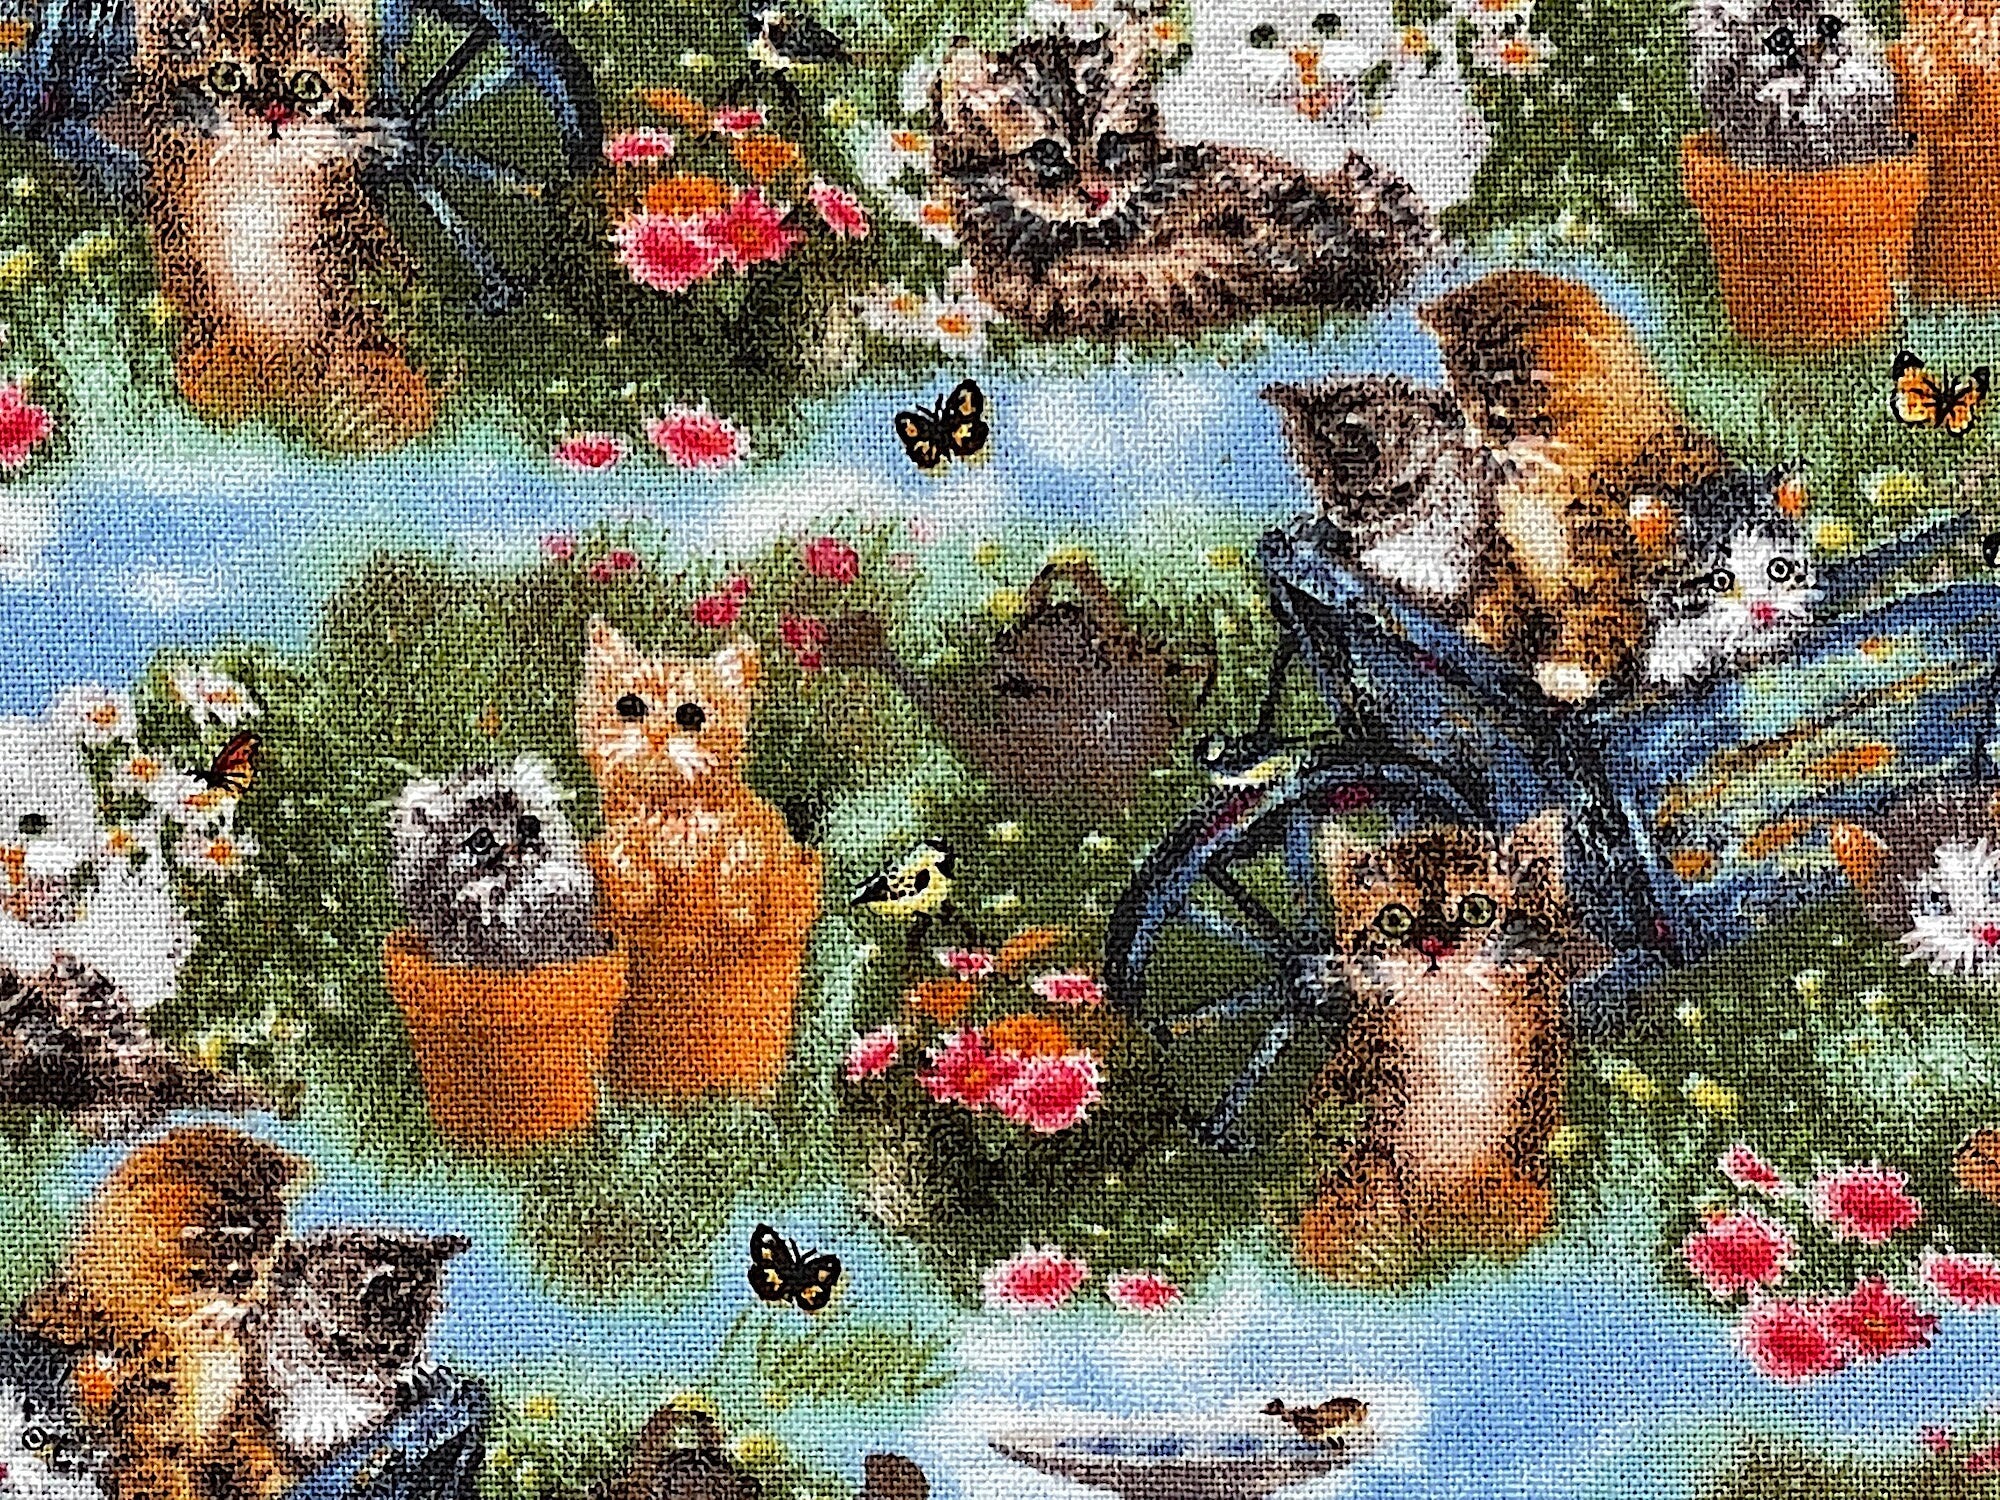 Close up of cats in a wheelbarrow in a garden amongst grass and flowers.